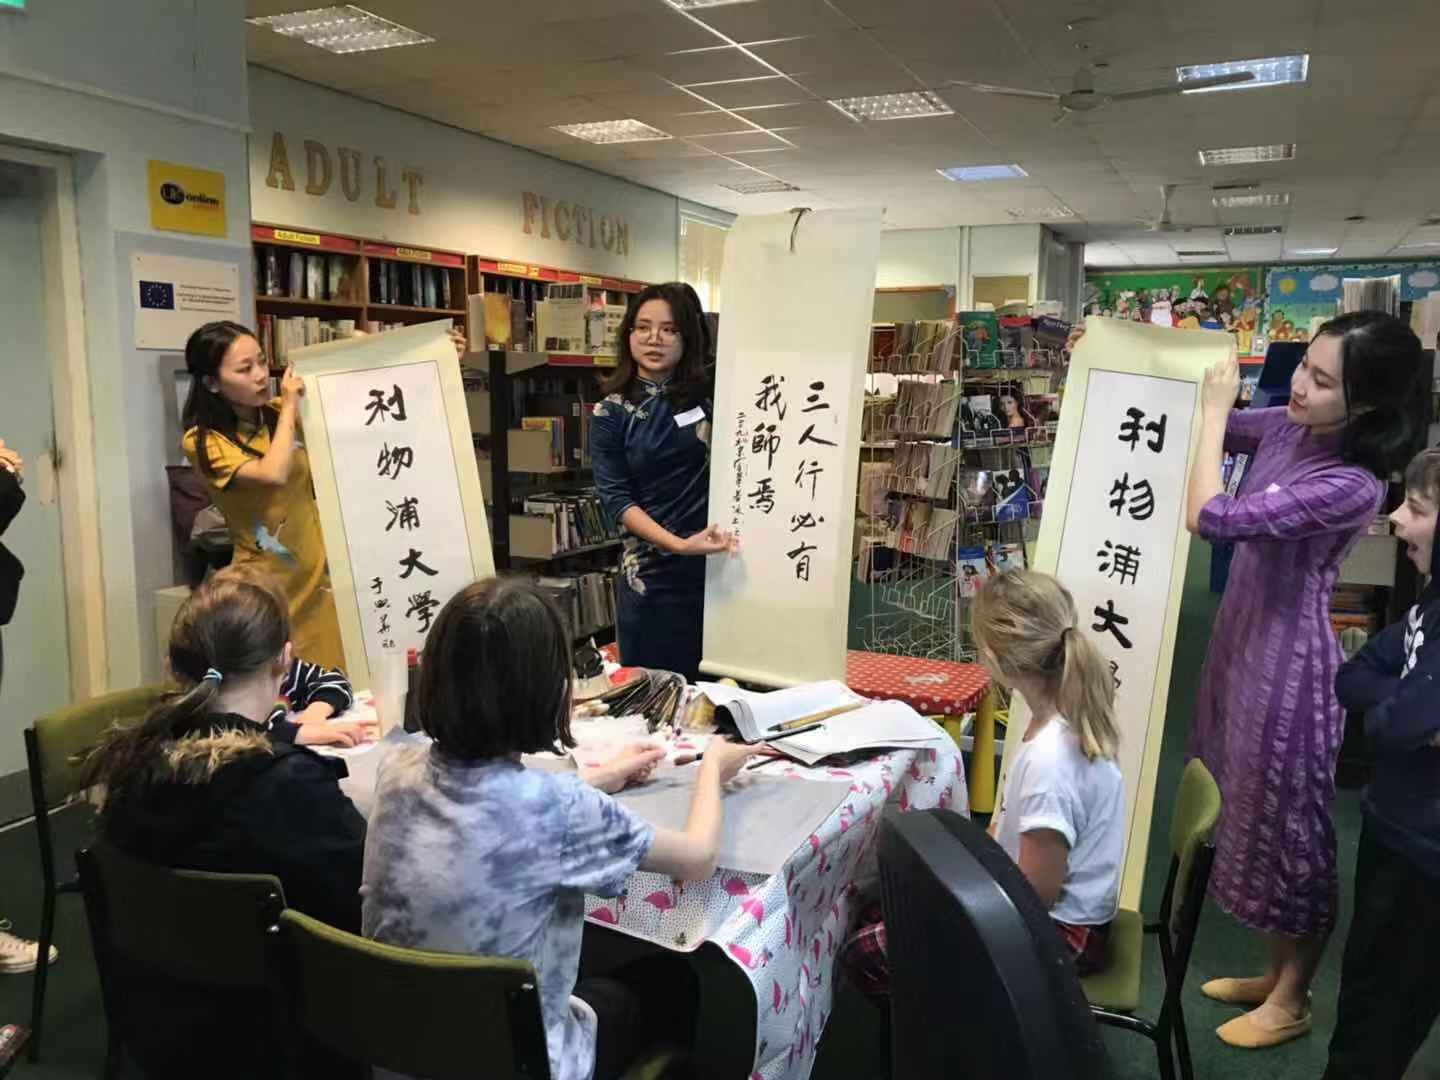 On September 15, local time in the UK, the Confucius Institute at the University of Liverpool held a language and culture event at the Higher Bebington Library for celebrating the Mid-Autumn Festival, attracting more than 20 children and parents.